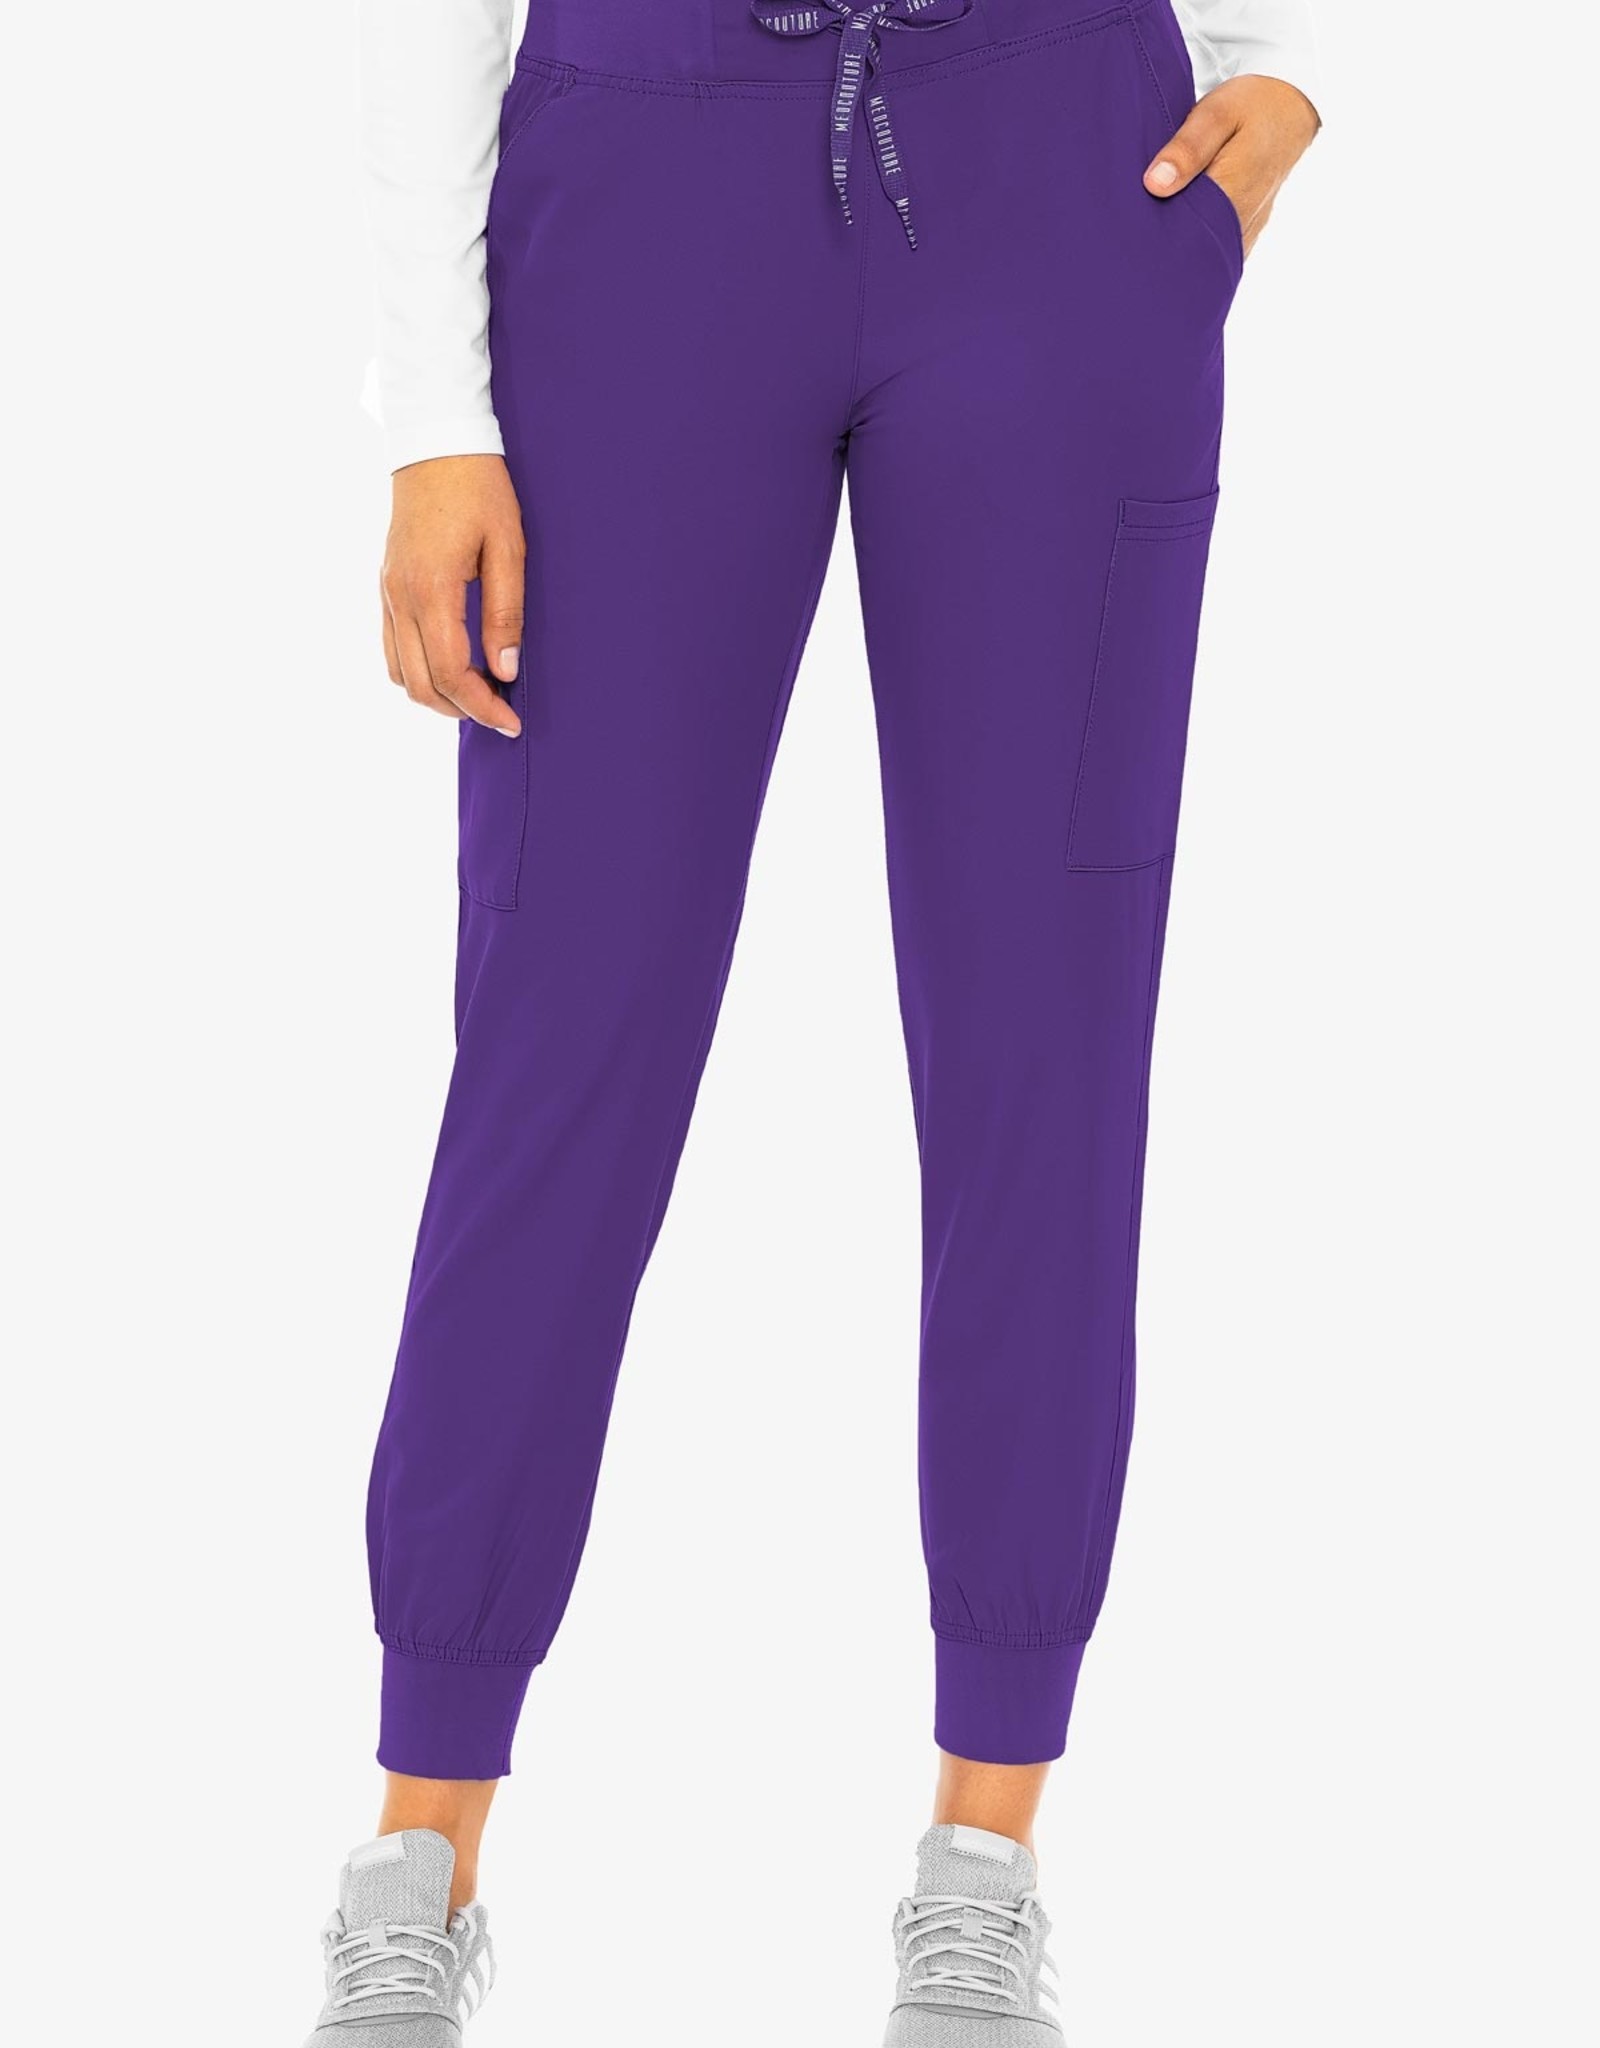 Med Couture Insight Women's Jogger Pant (Plus Size)